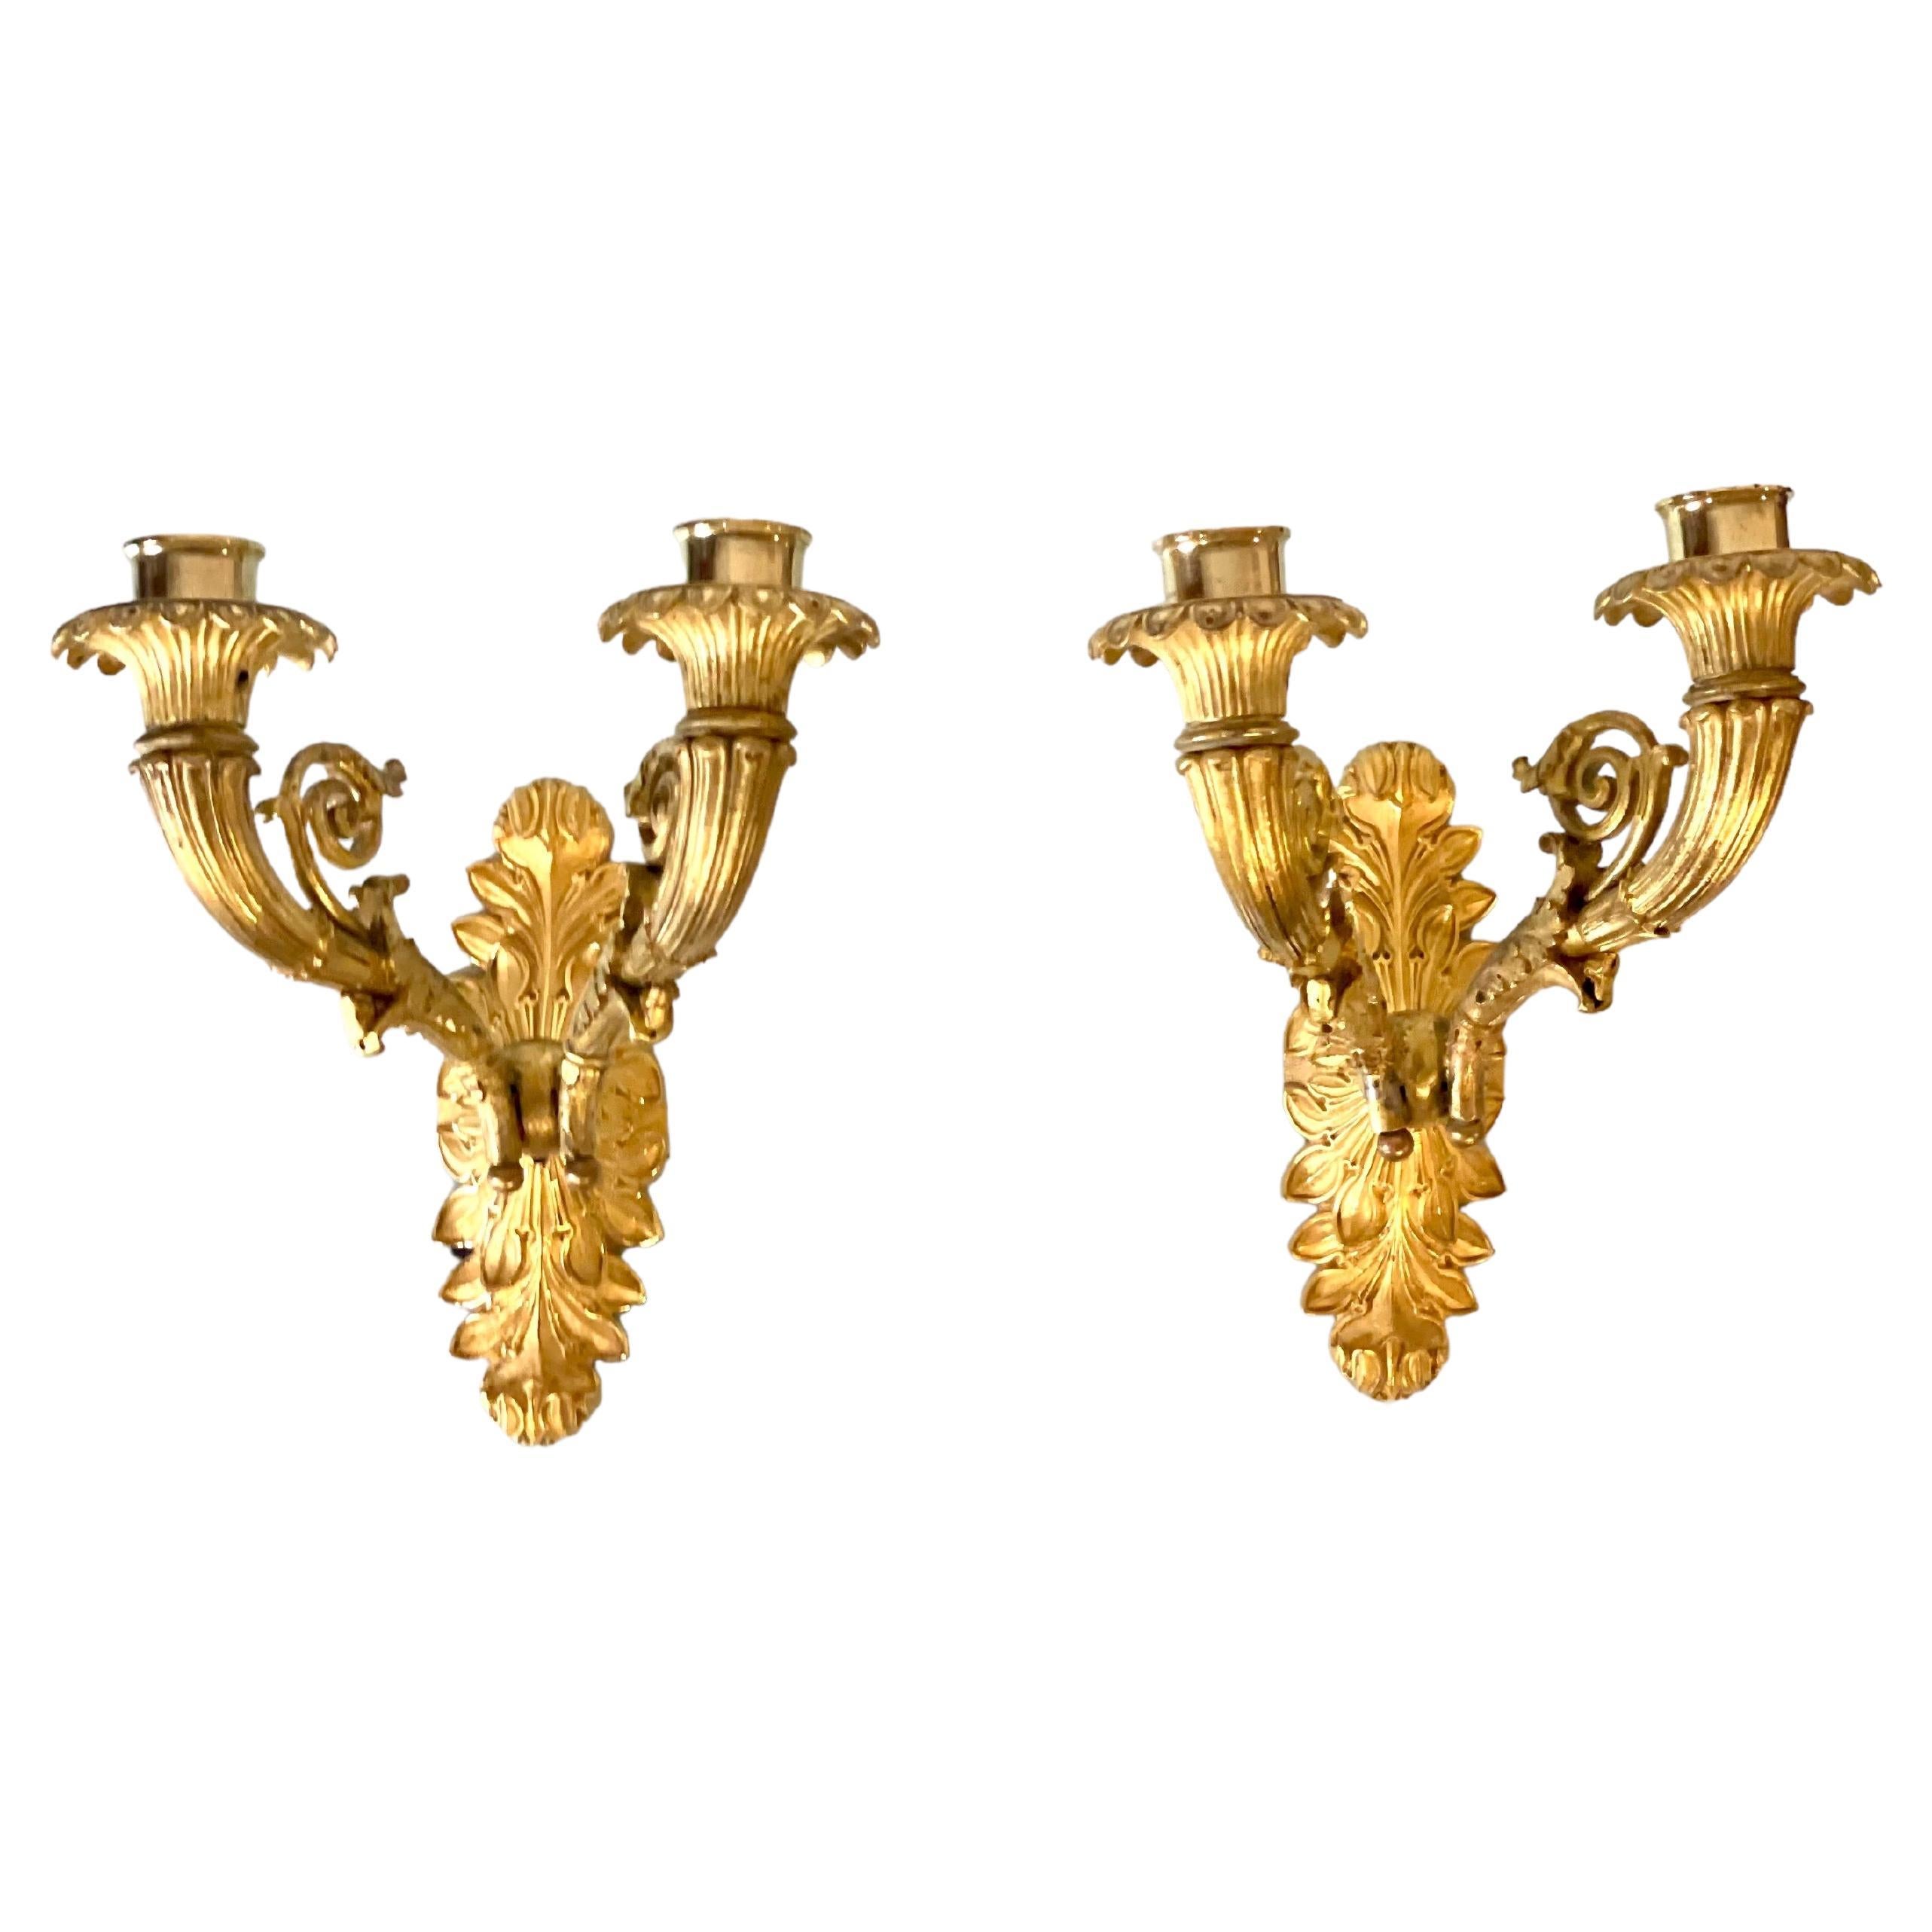 Pair of French Restauration Period Gilded Bronze Wall Sconces For Sale